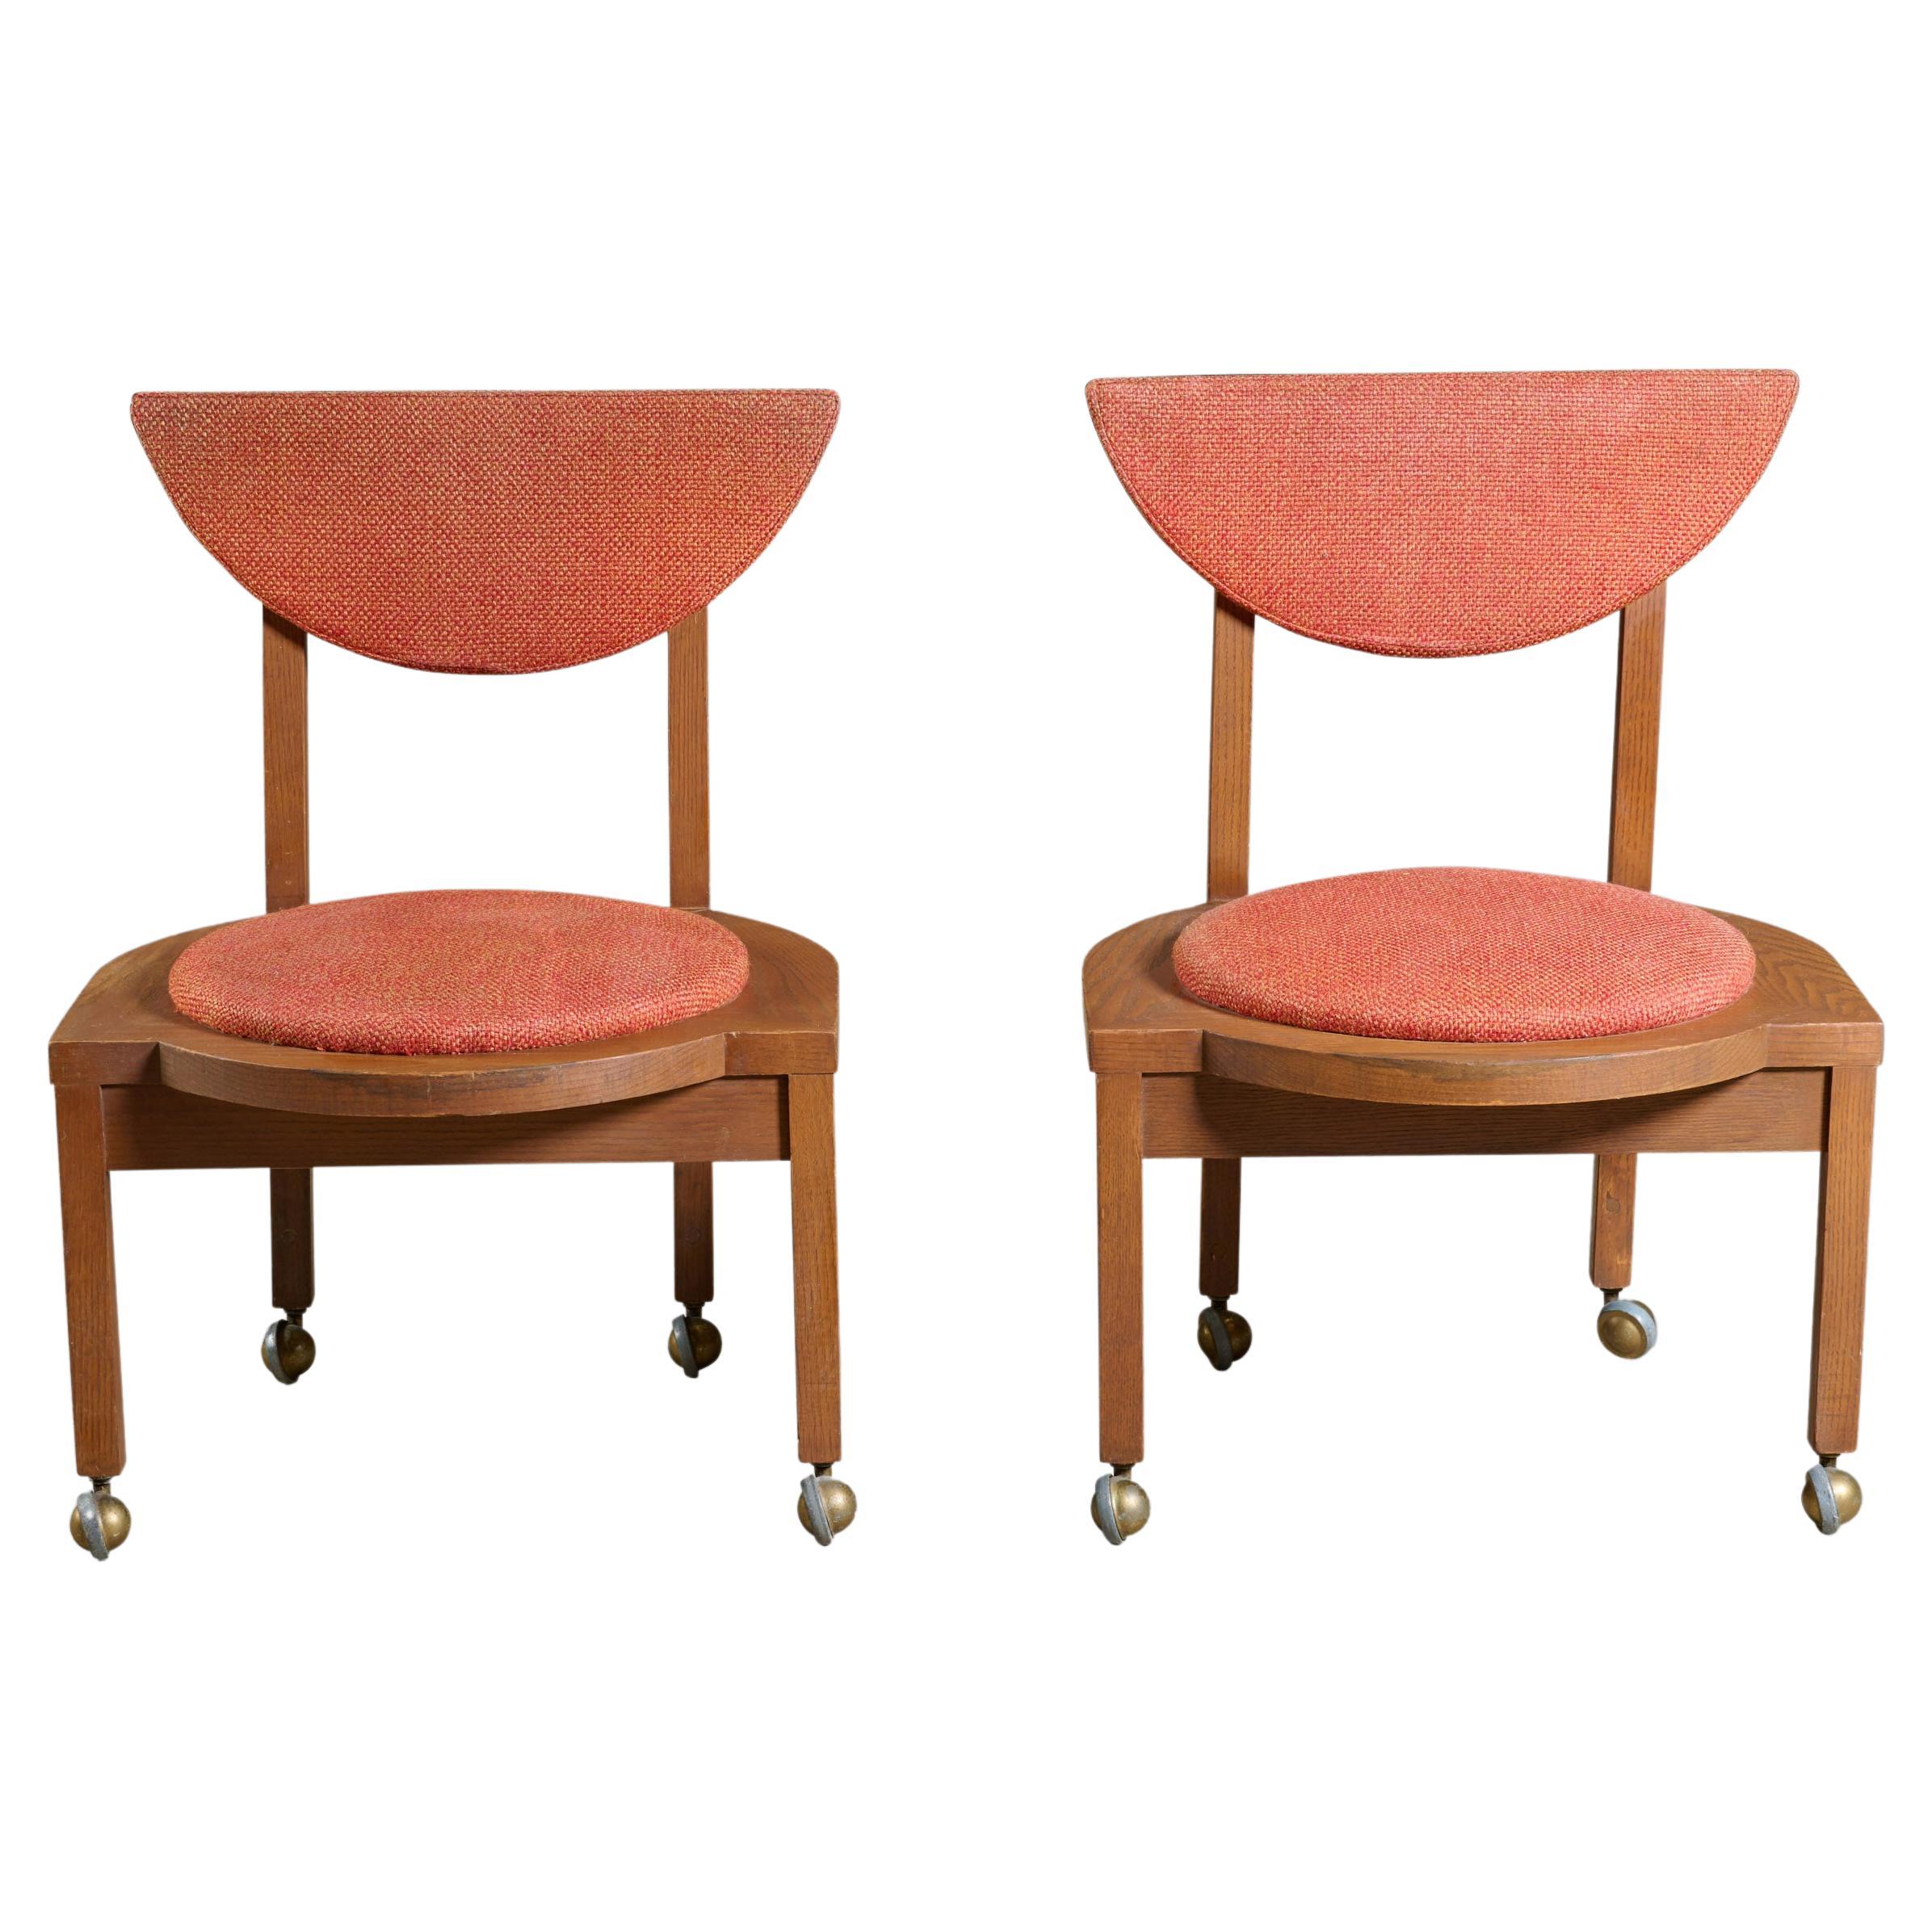 Pair of Frank Lloyd Wright Dinning Room Chairs